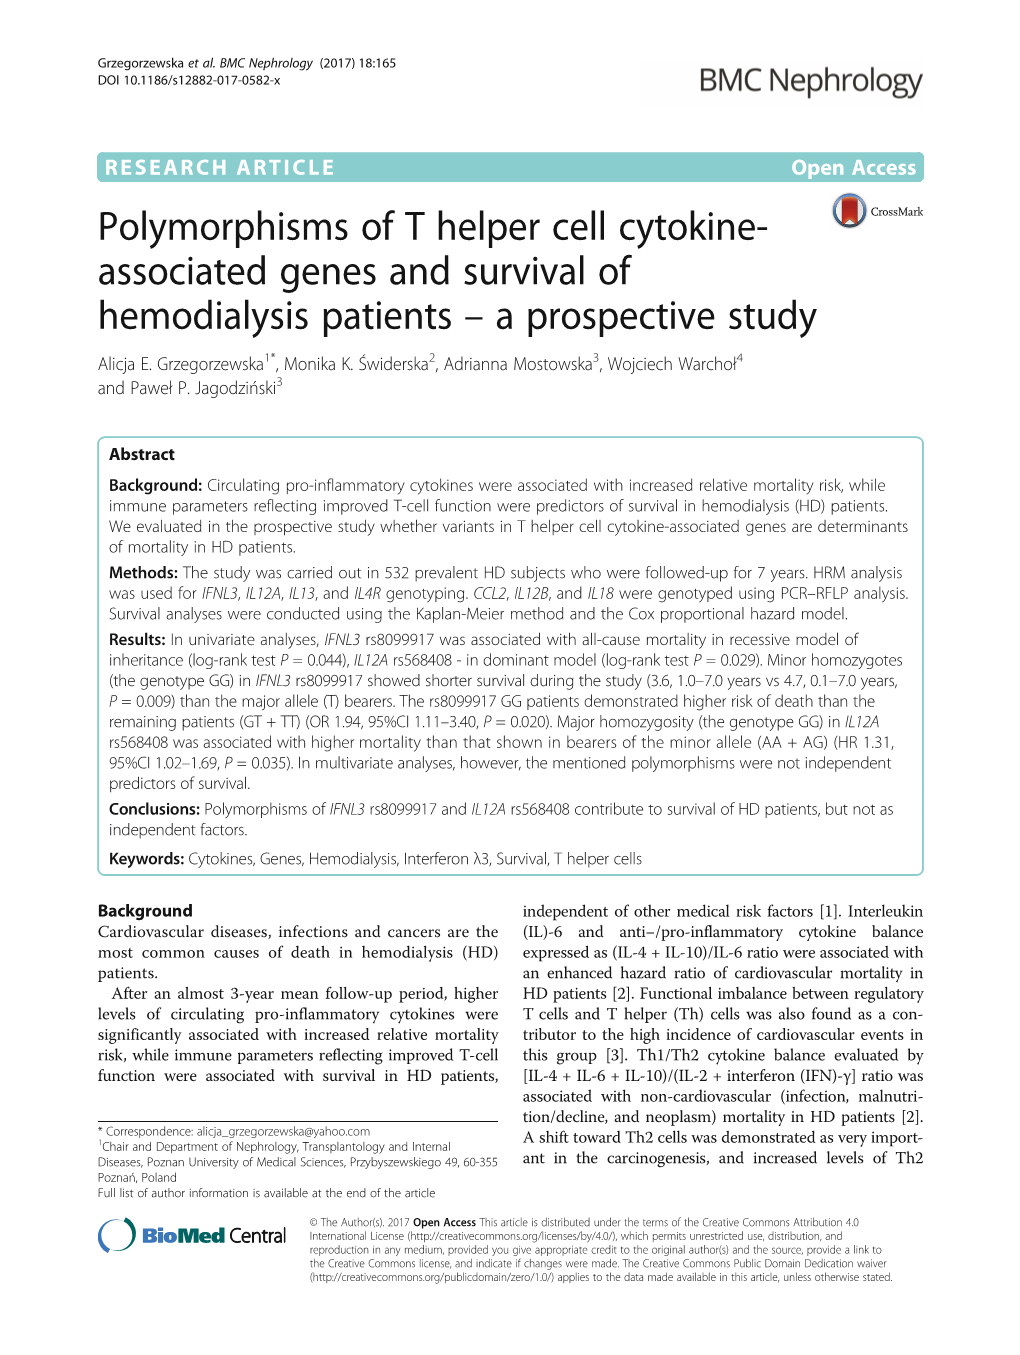 Polymorphisms of T Helper Cell Cytokine-Associated Genes And